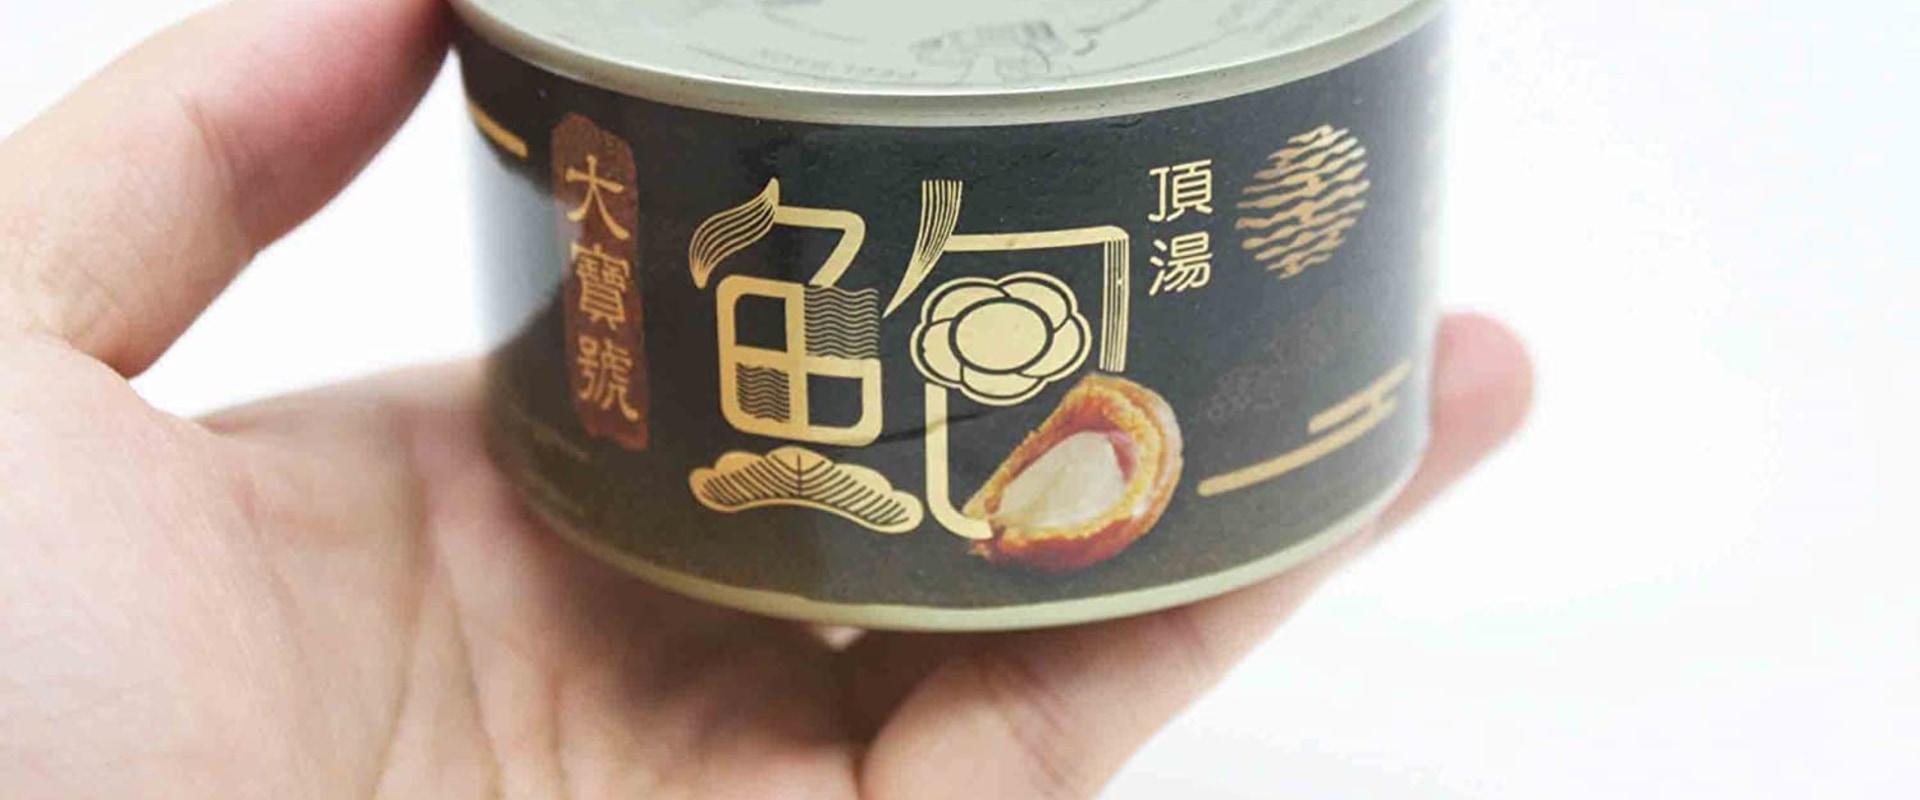 The Deliciousness of Canned Abalone